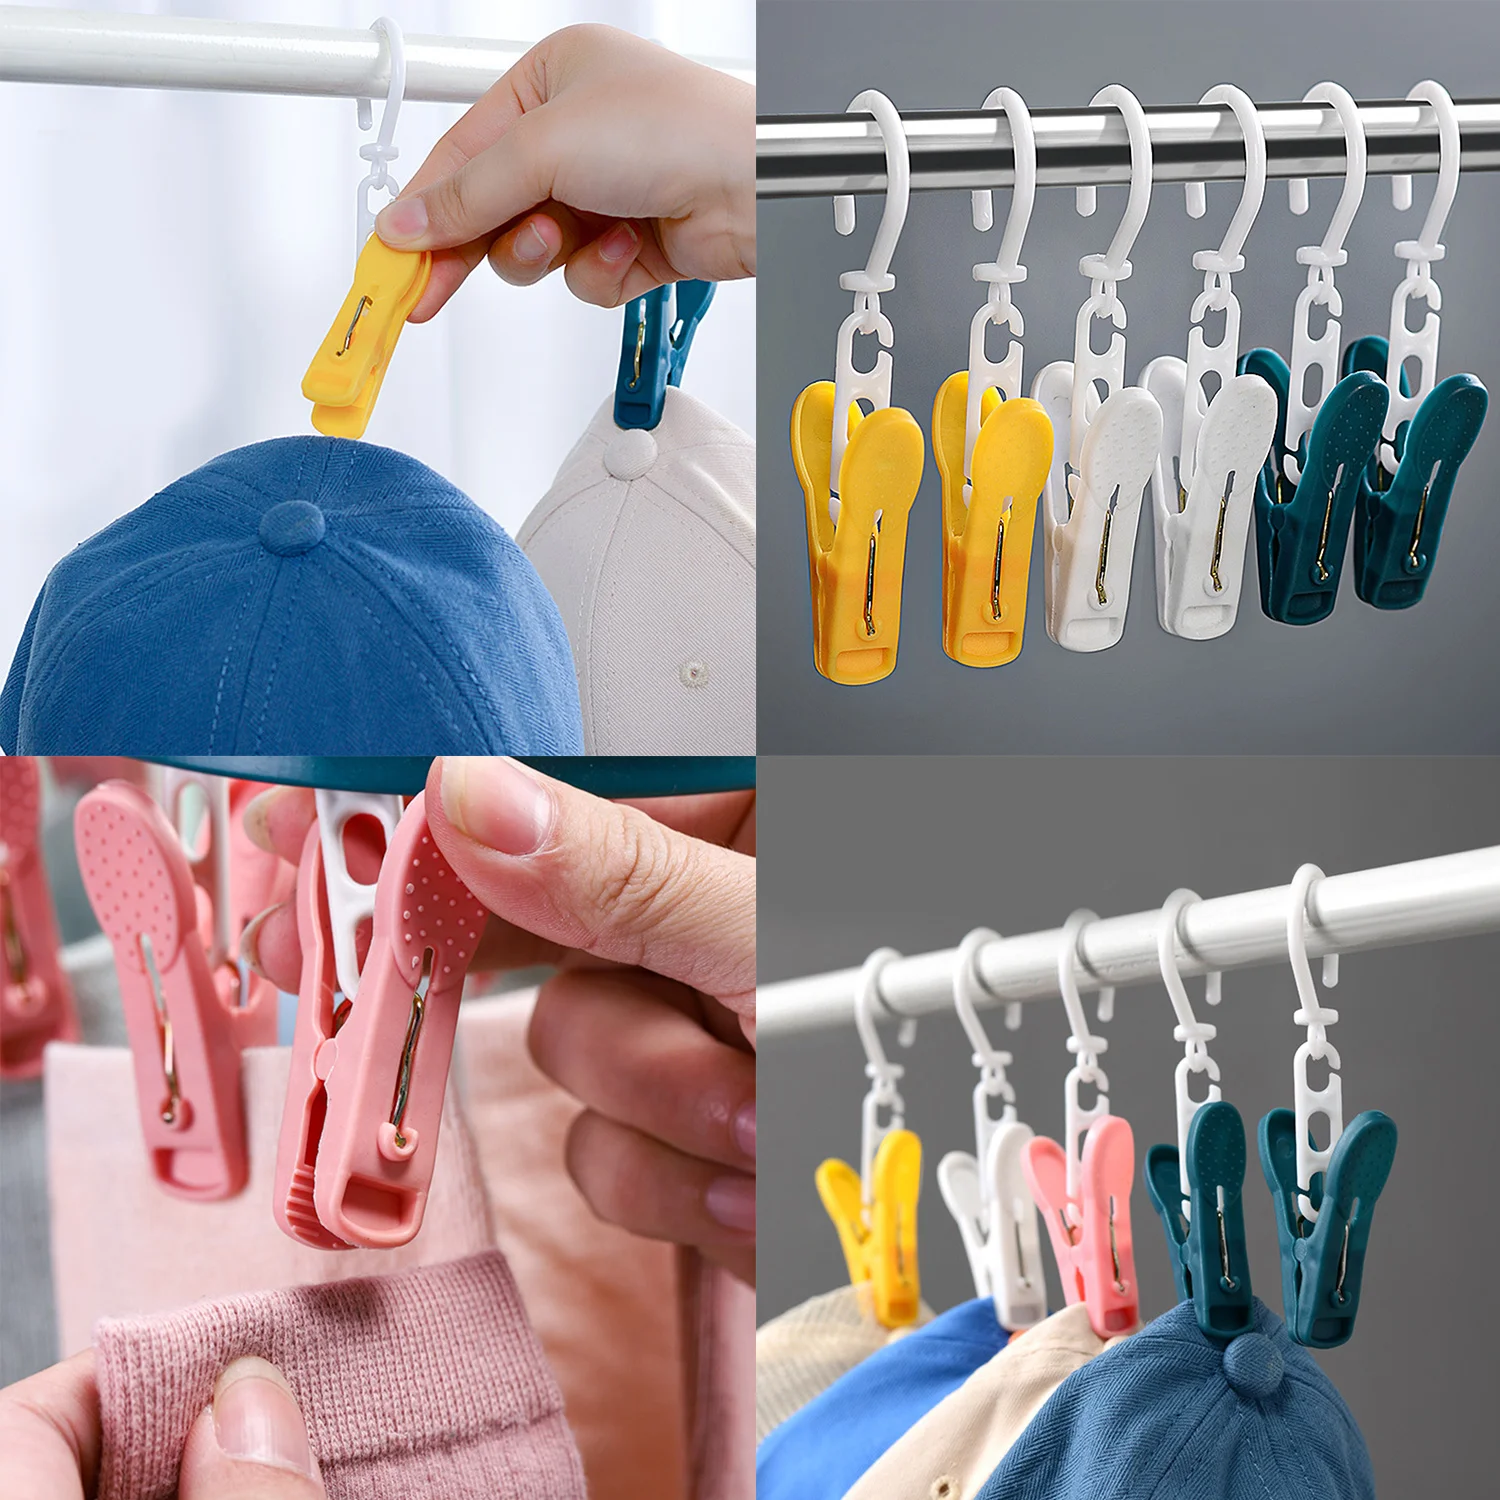 

Clothes Socks Hang Clip Hat Hanger Rotatable Durable Towels Pegs Sundries Hook Home Garden Laundry Storage Clip Closet Organizer